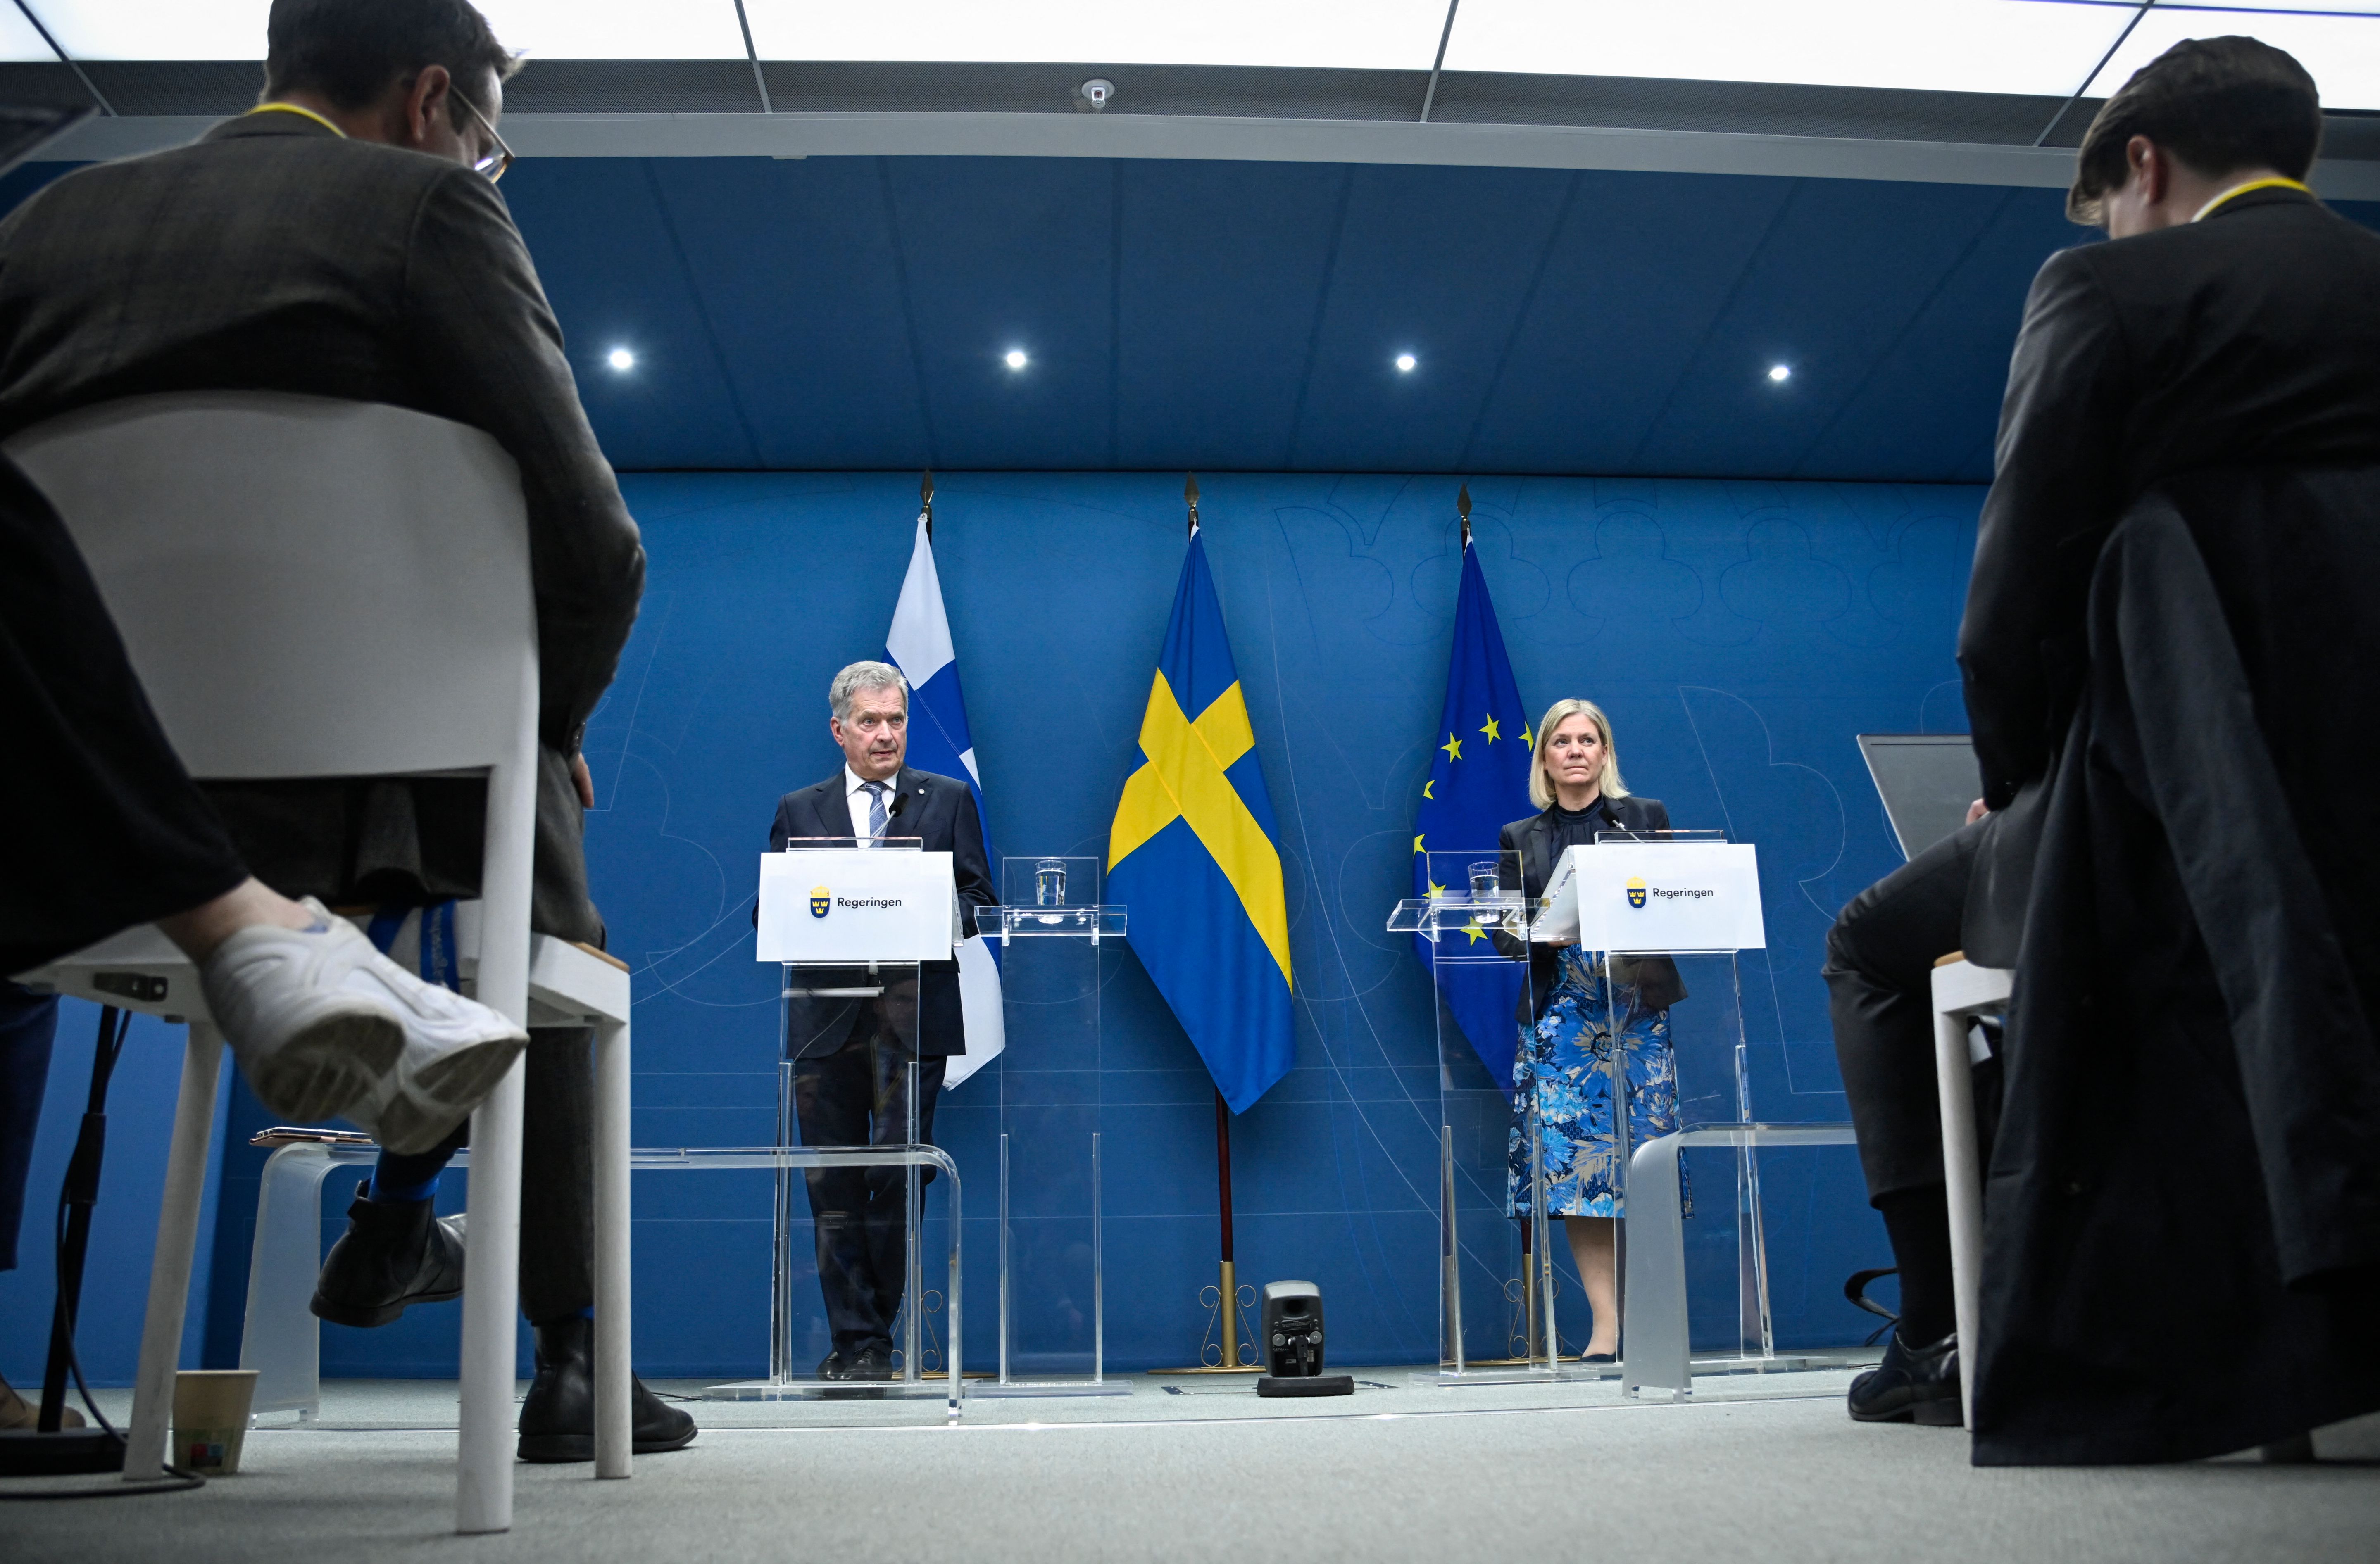 Finland's President Sauli Niinisto (L) and Sweden's Prime Minister Magdalena Andersson address a news conference in Stockholm, Sweden, on May 17.